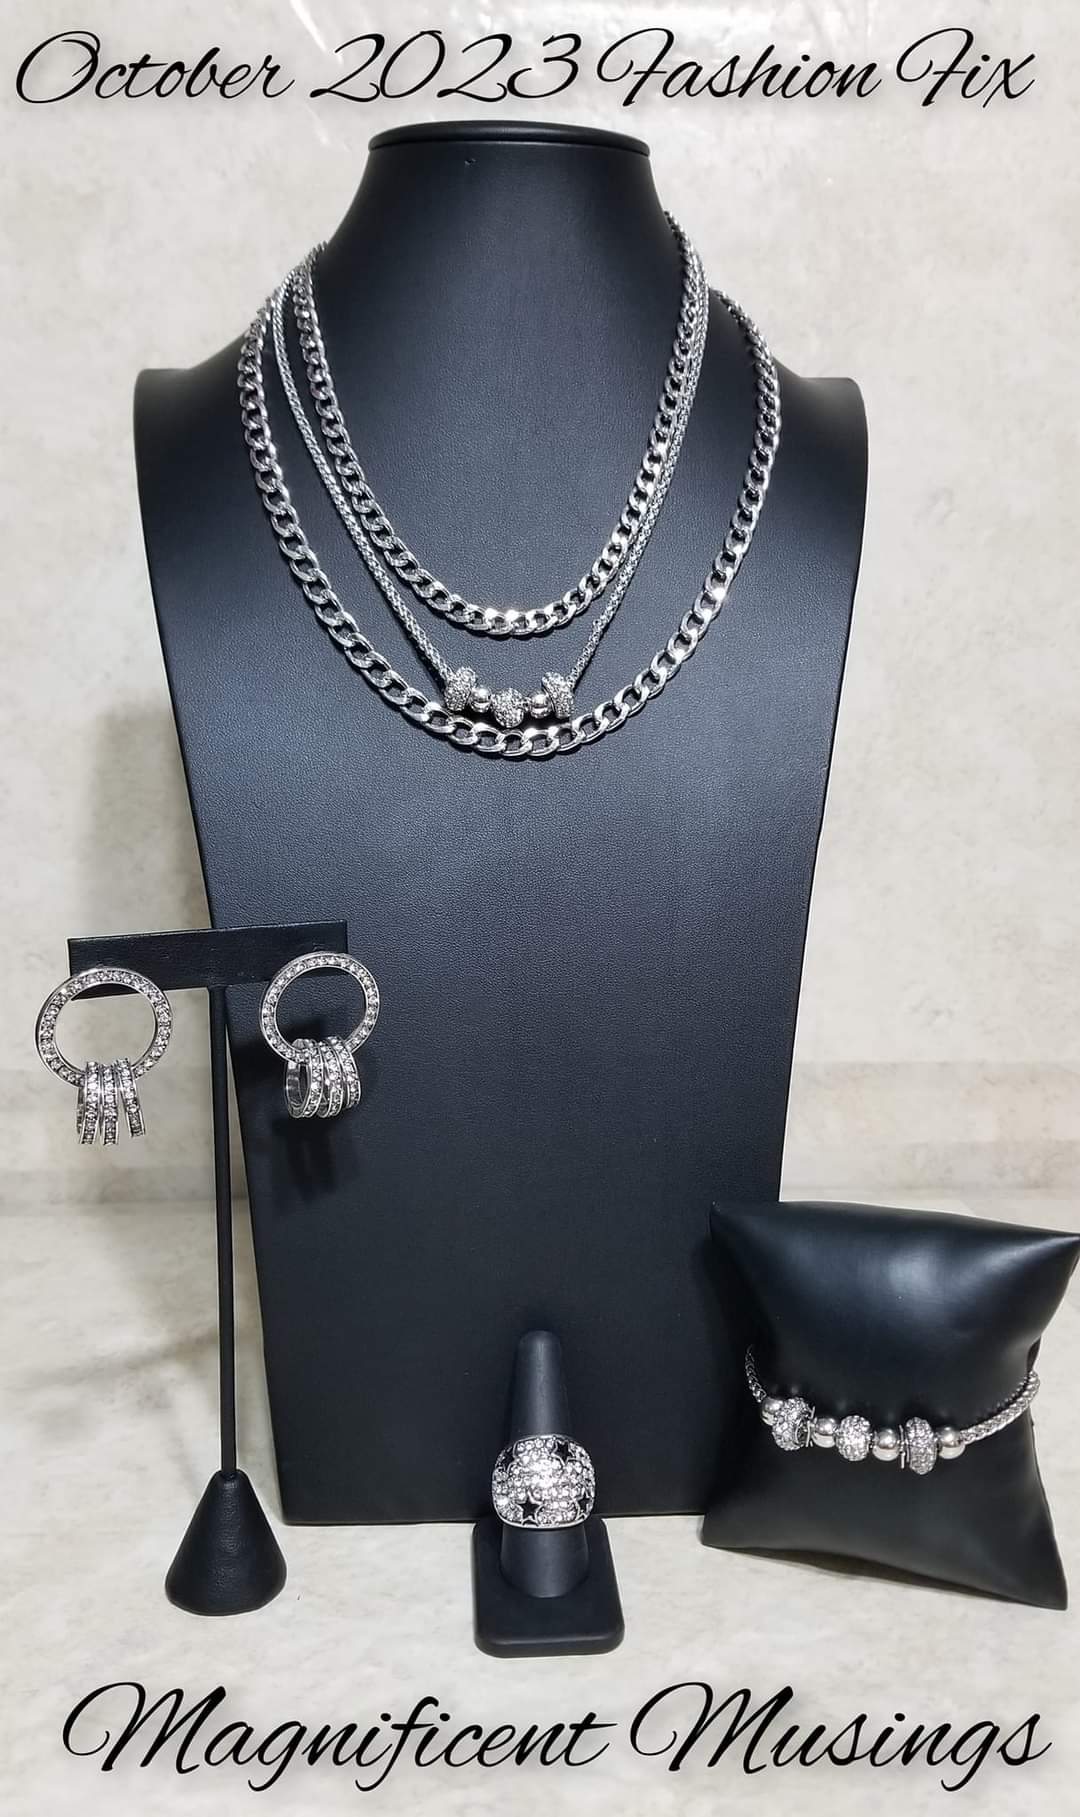 Magnificent Musings - Silver Jewelry Set - Paparazzi Accessories - Fashion Fix 4 Piece Silver Jewelry Set